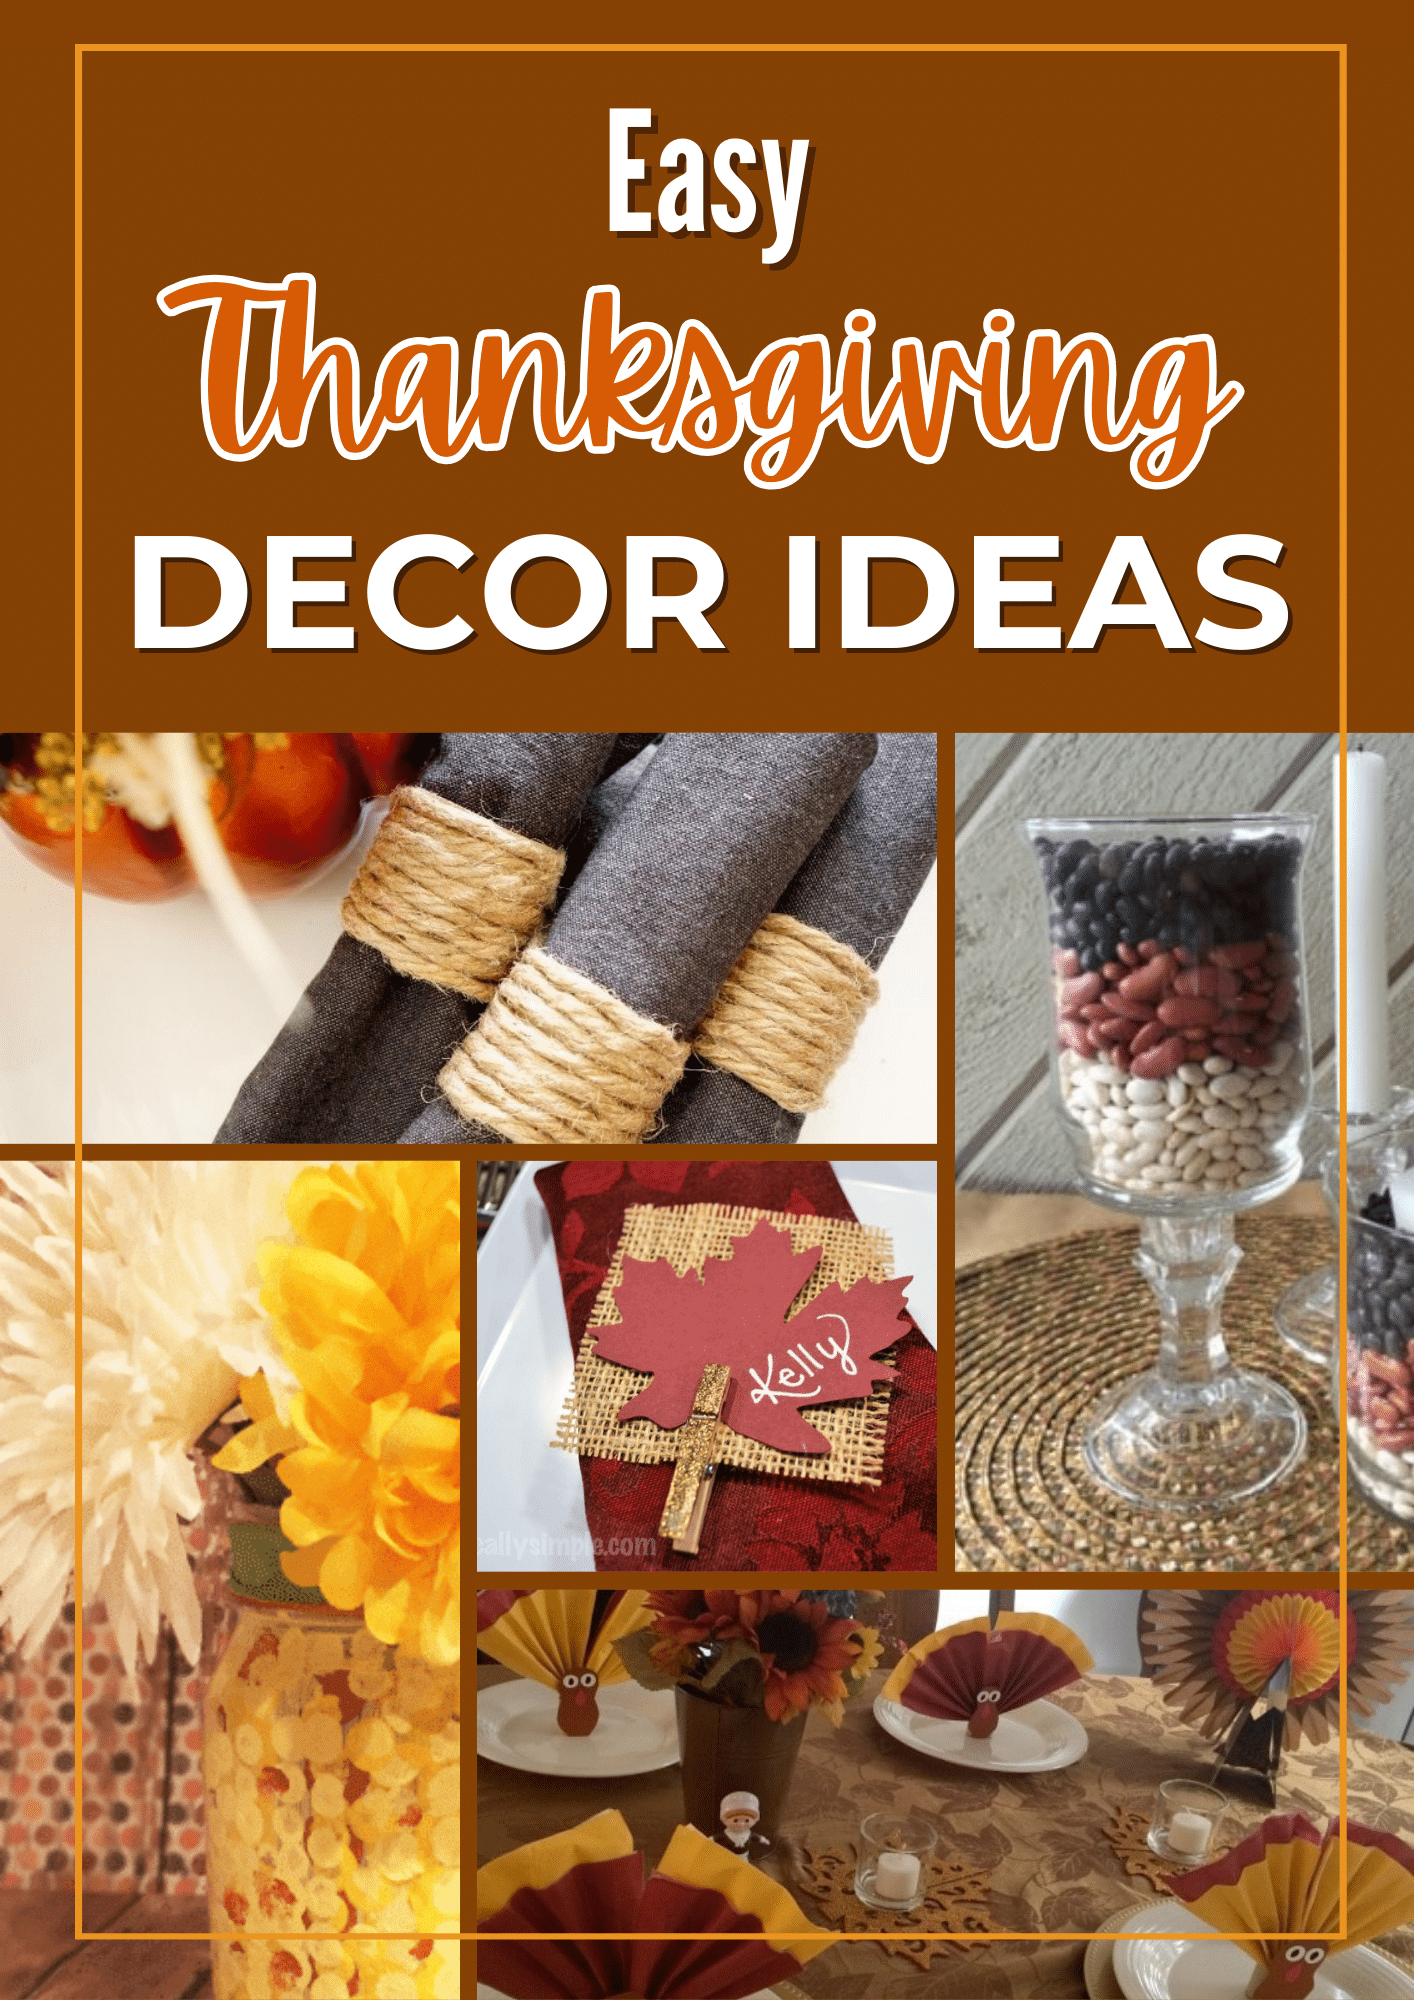 Easy Thanksgiving decor ideas can transform any space into a warm and inviting setting for the holiday. Whether you're hosting a small gathering or a big feast, these simple and creative ideas will add a festive touch